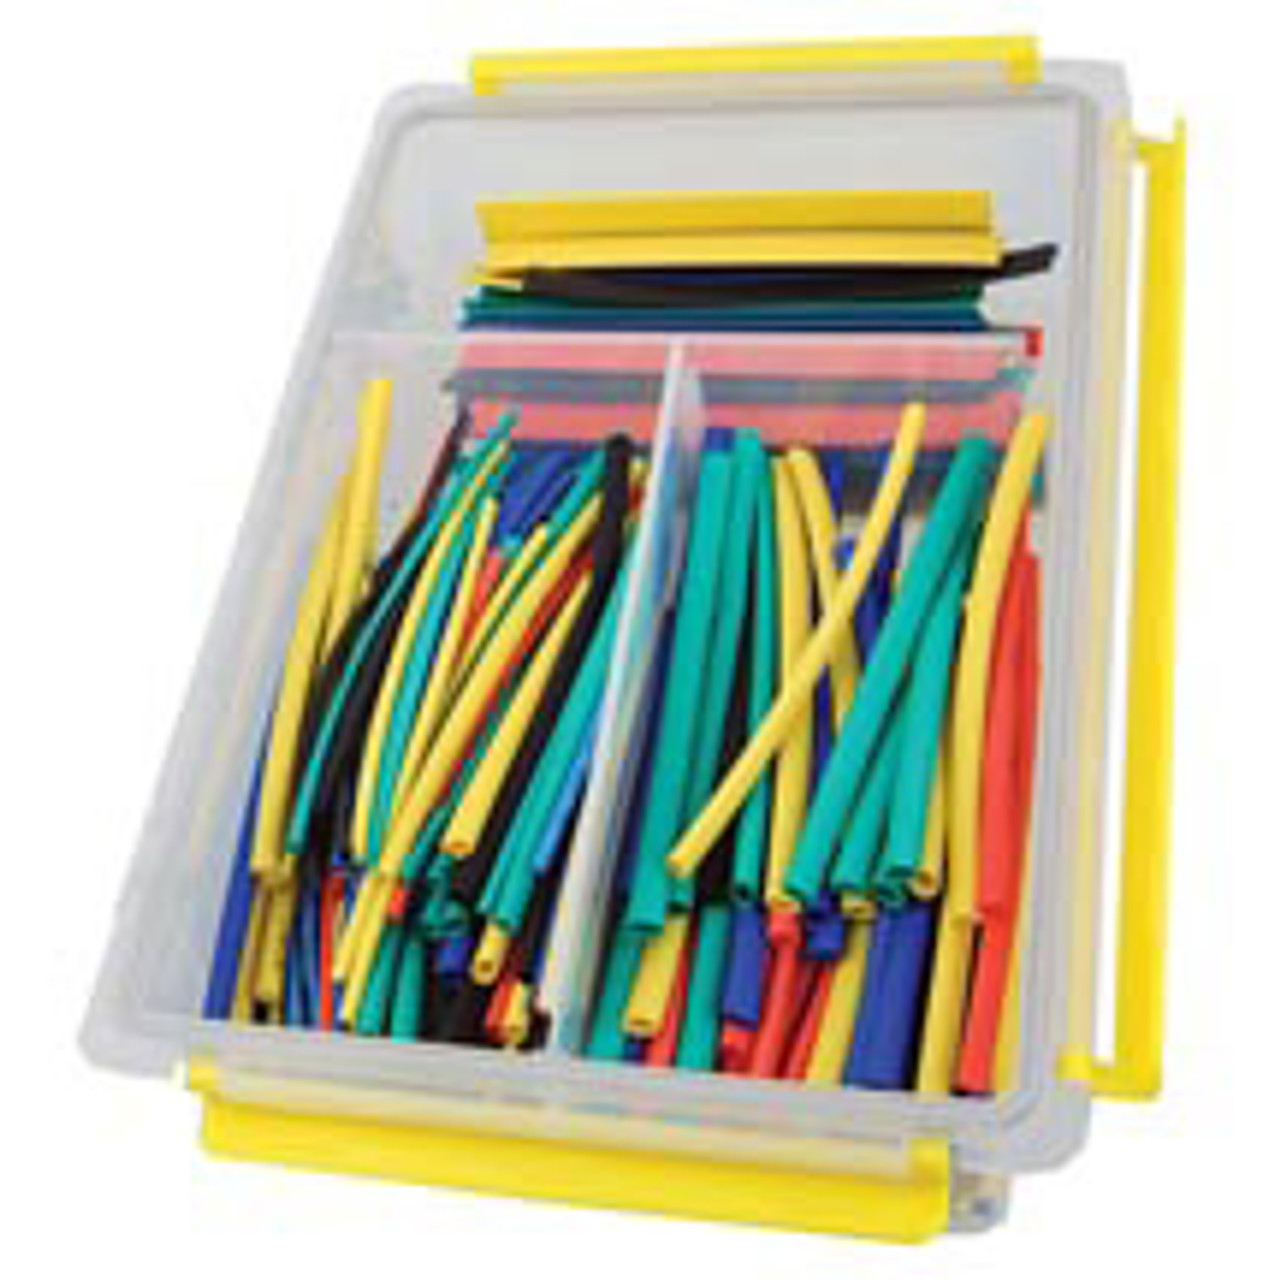 Buy EZ Red HS34 Heat Shrink Tubes Assortment 235pc with an everyday low  price and fast shipping! JB Tools